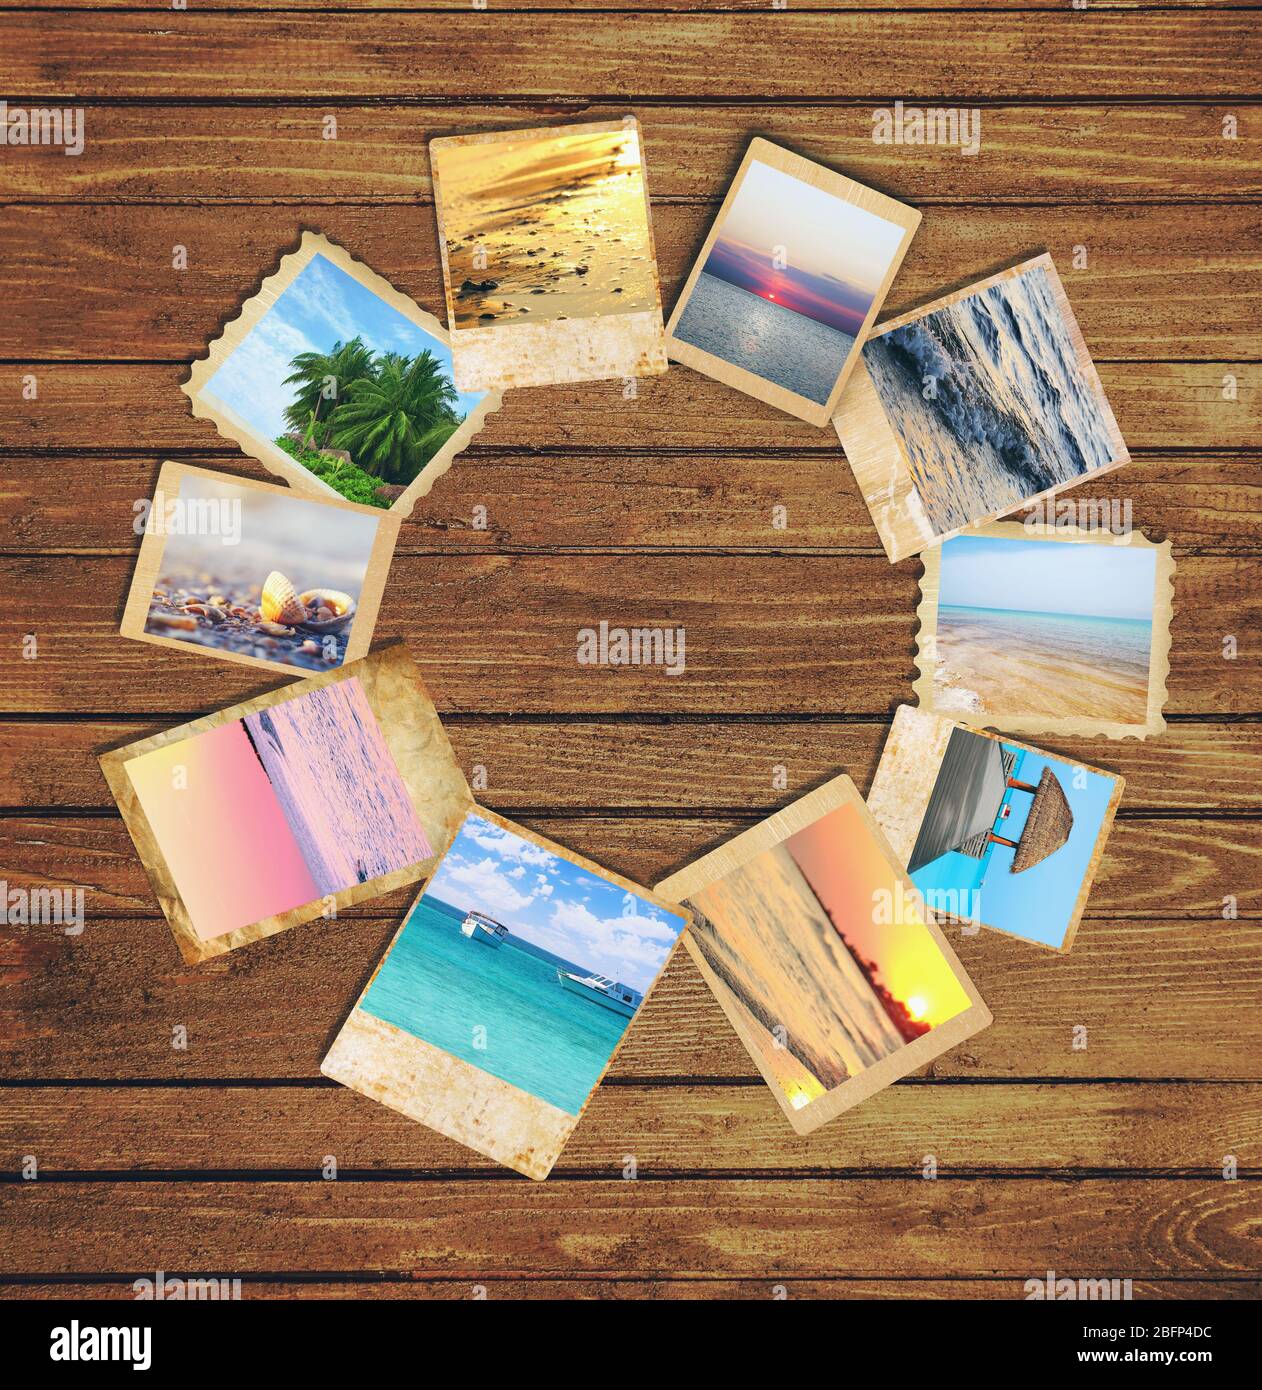 Different photos of nature pictures on wooden background Stock Photo